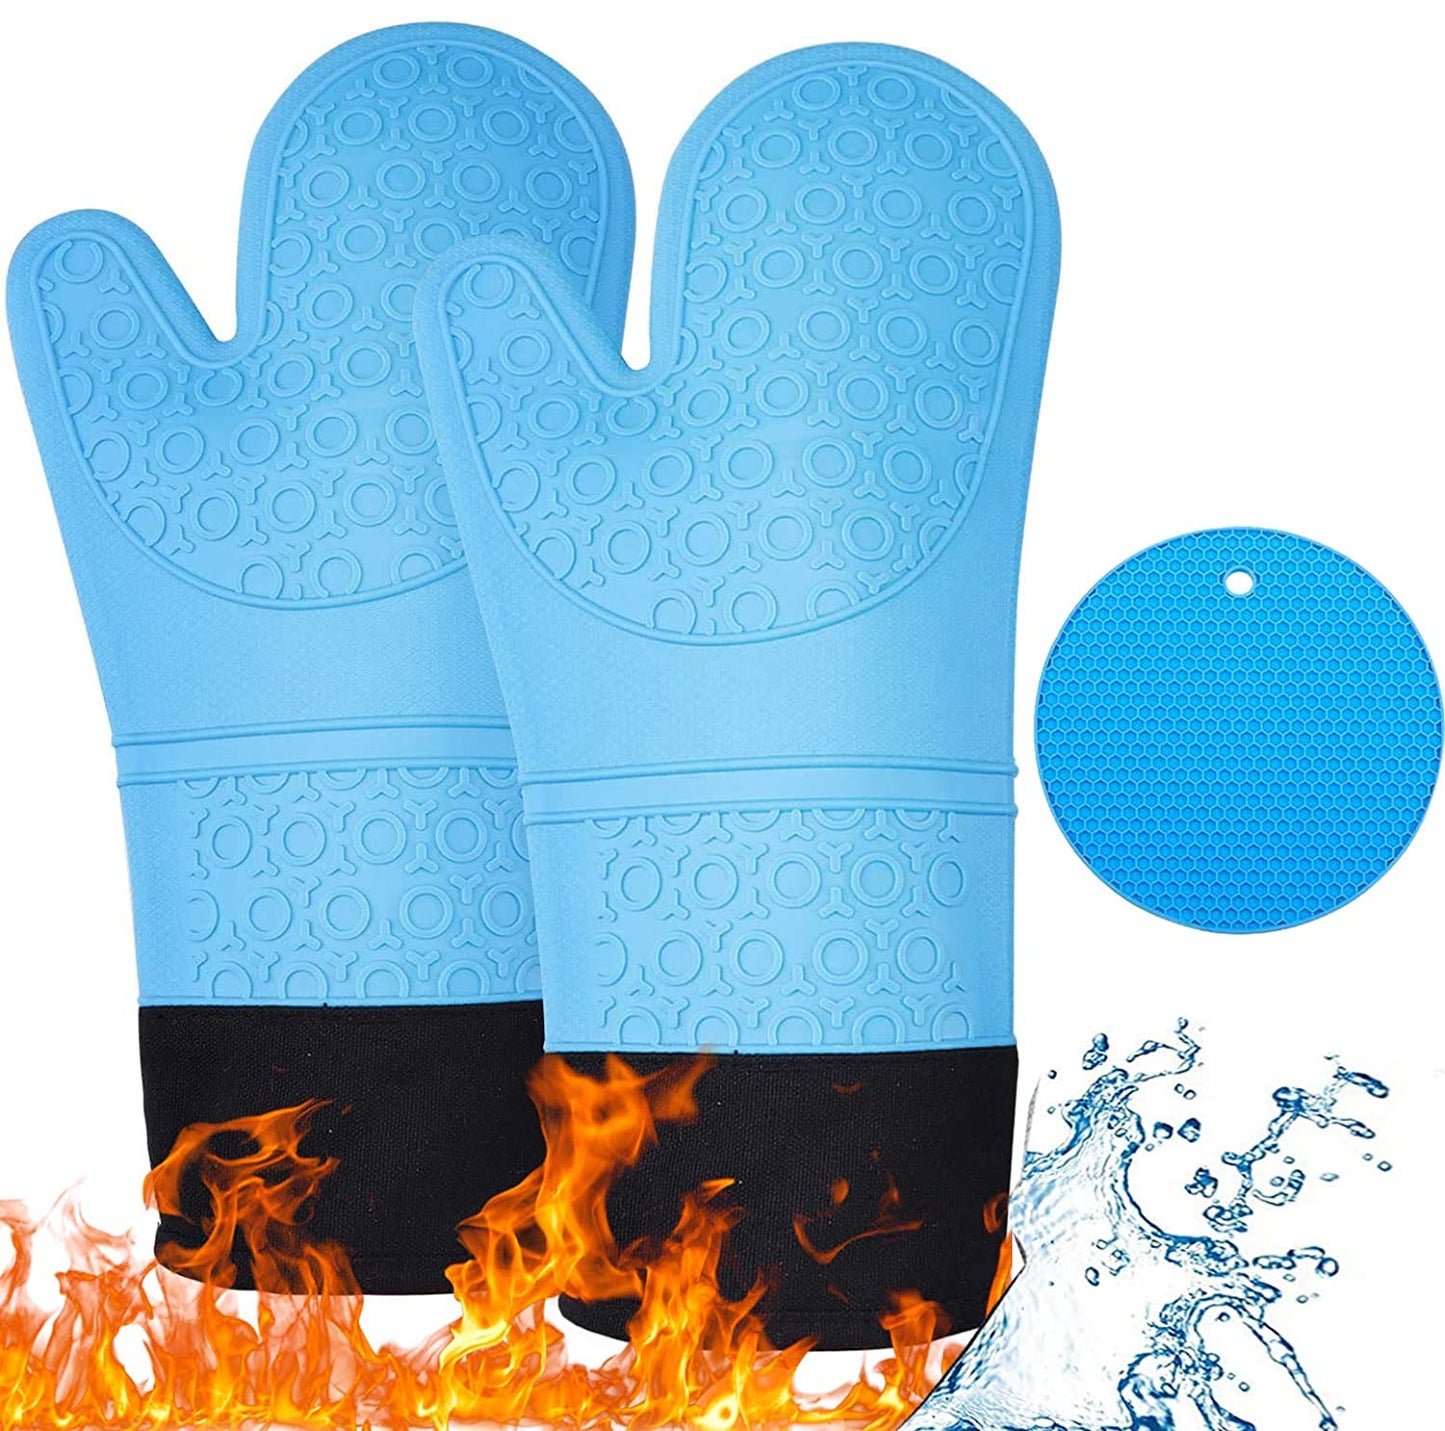 DOCOSS -Proffessional Large Silicone Oven Gloves Heat Proof ,Kitchen Oven Mittens For Baking Heat Resistant Oven Mitts Cotten Quilted Silicone Gloves For Oven,Microwave